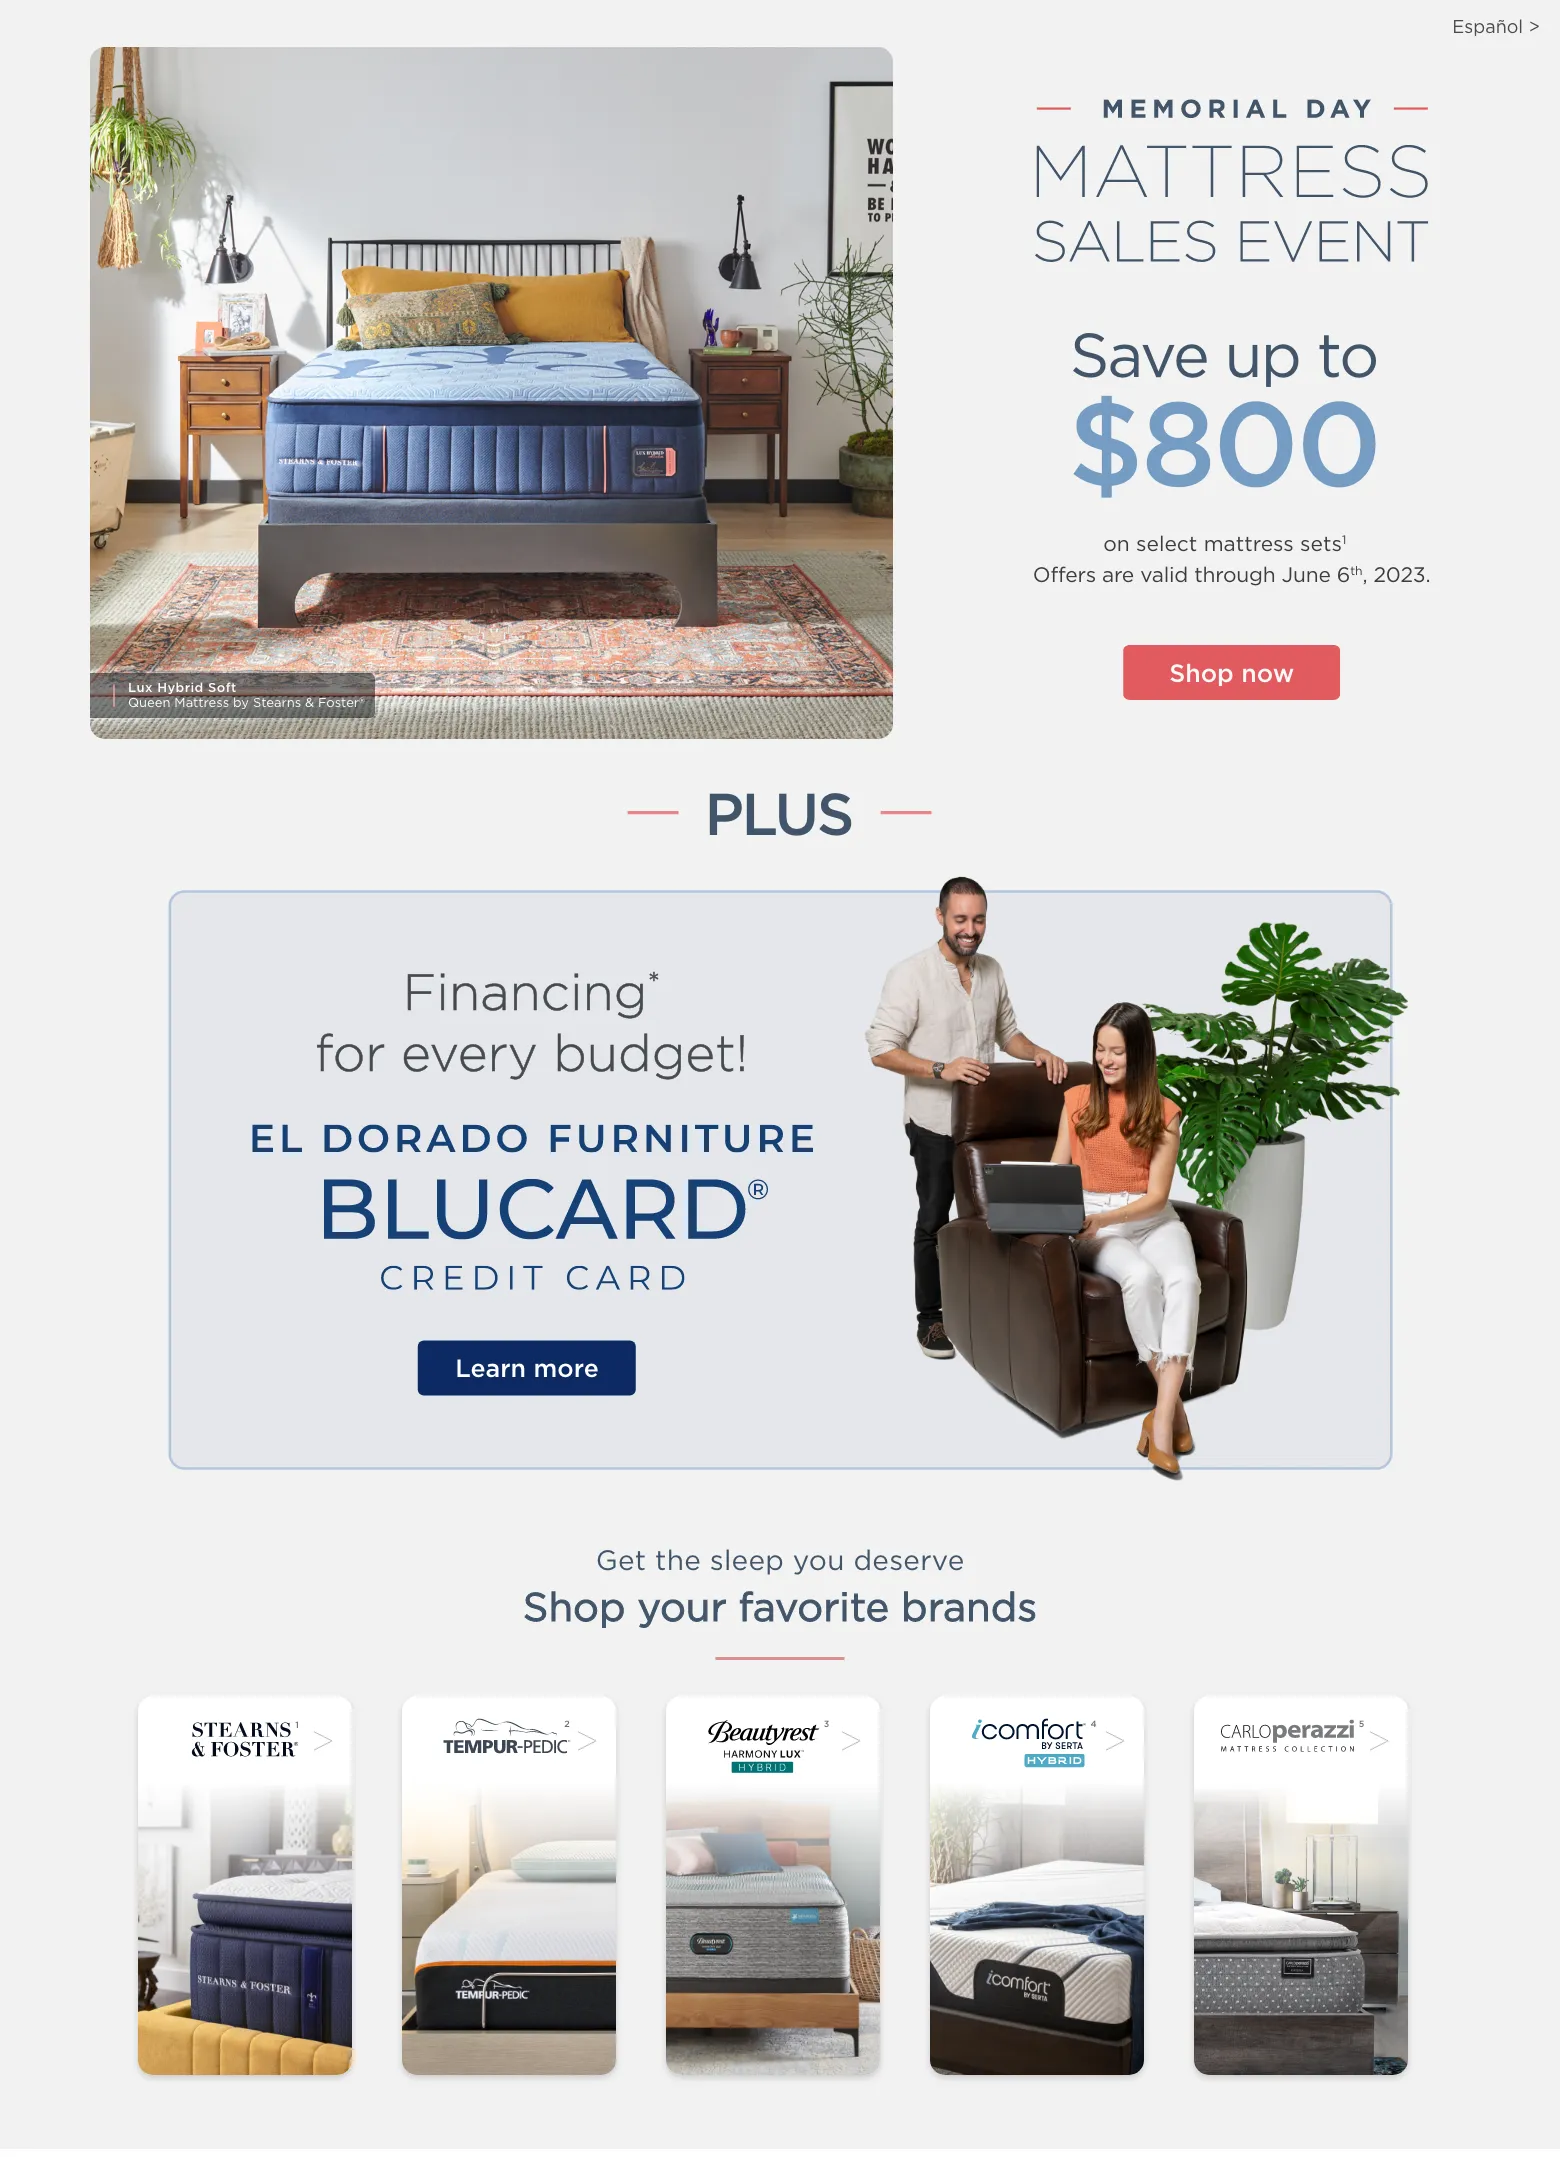 Memorial Day Mattress Sales Event Save up to $800 on select brand mattresses with adjustable base sets1. Offers are valid through July 6 2023. Shop now. Financing for every budget! El DOrado Furniture BLUCard Credit Card. Learn more. Get the sleep you deserve. Shop your favorite brands. 1. Stearn and Foster. 2. Tempur-pedic. 3. Beautyrest. 4. Serta. 5. Carlo Perazzi.